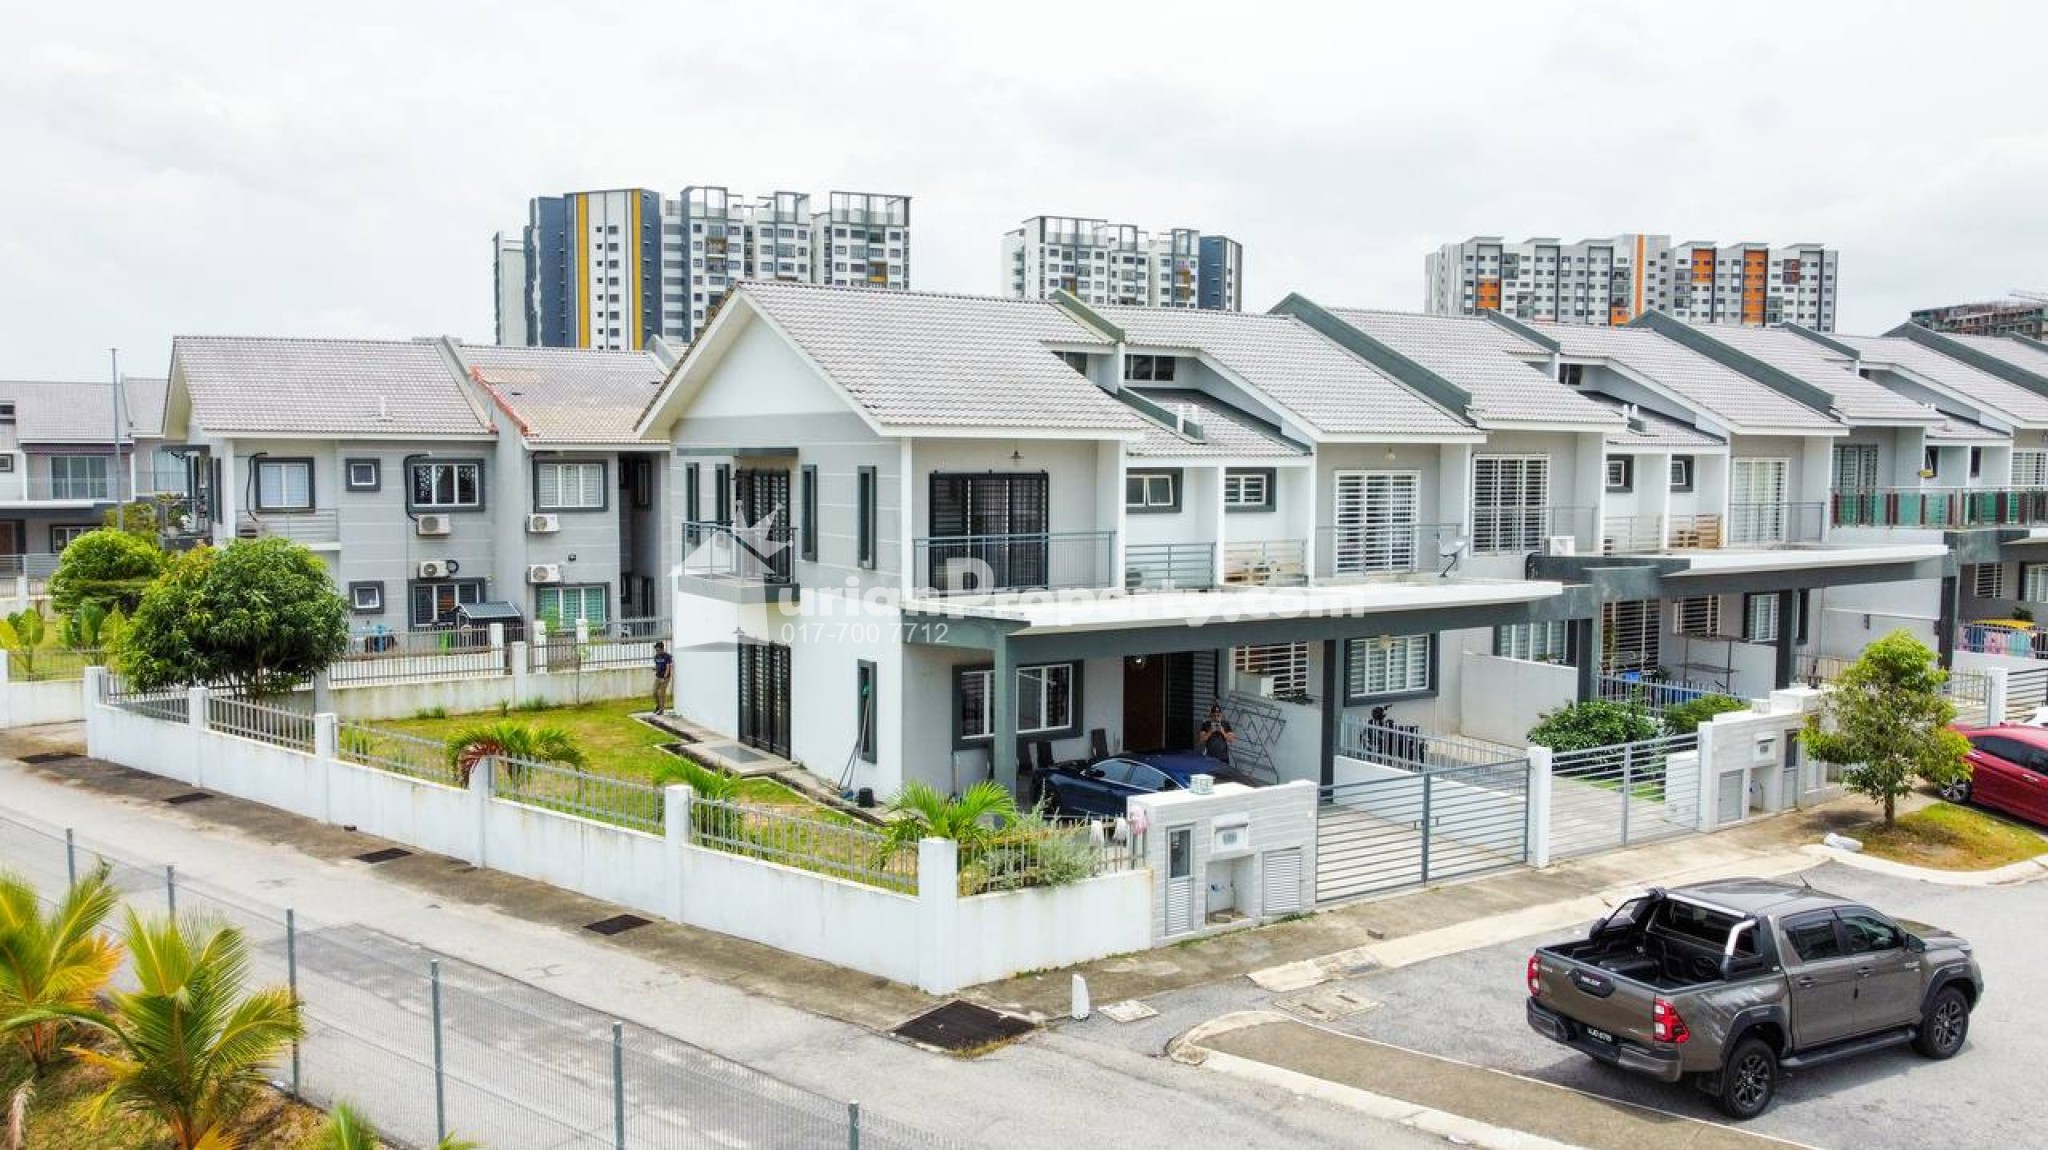 Terrace House For Sale at Laman View